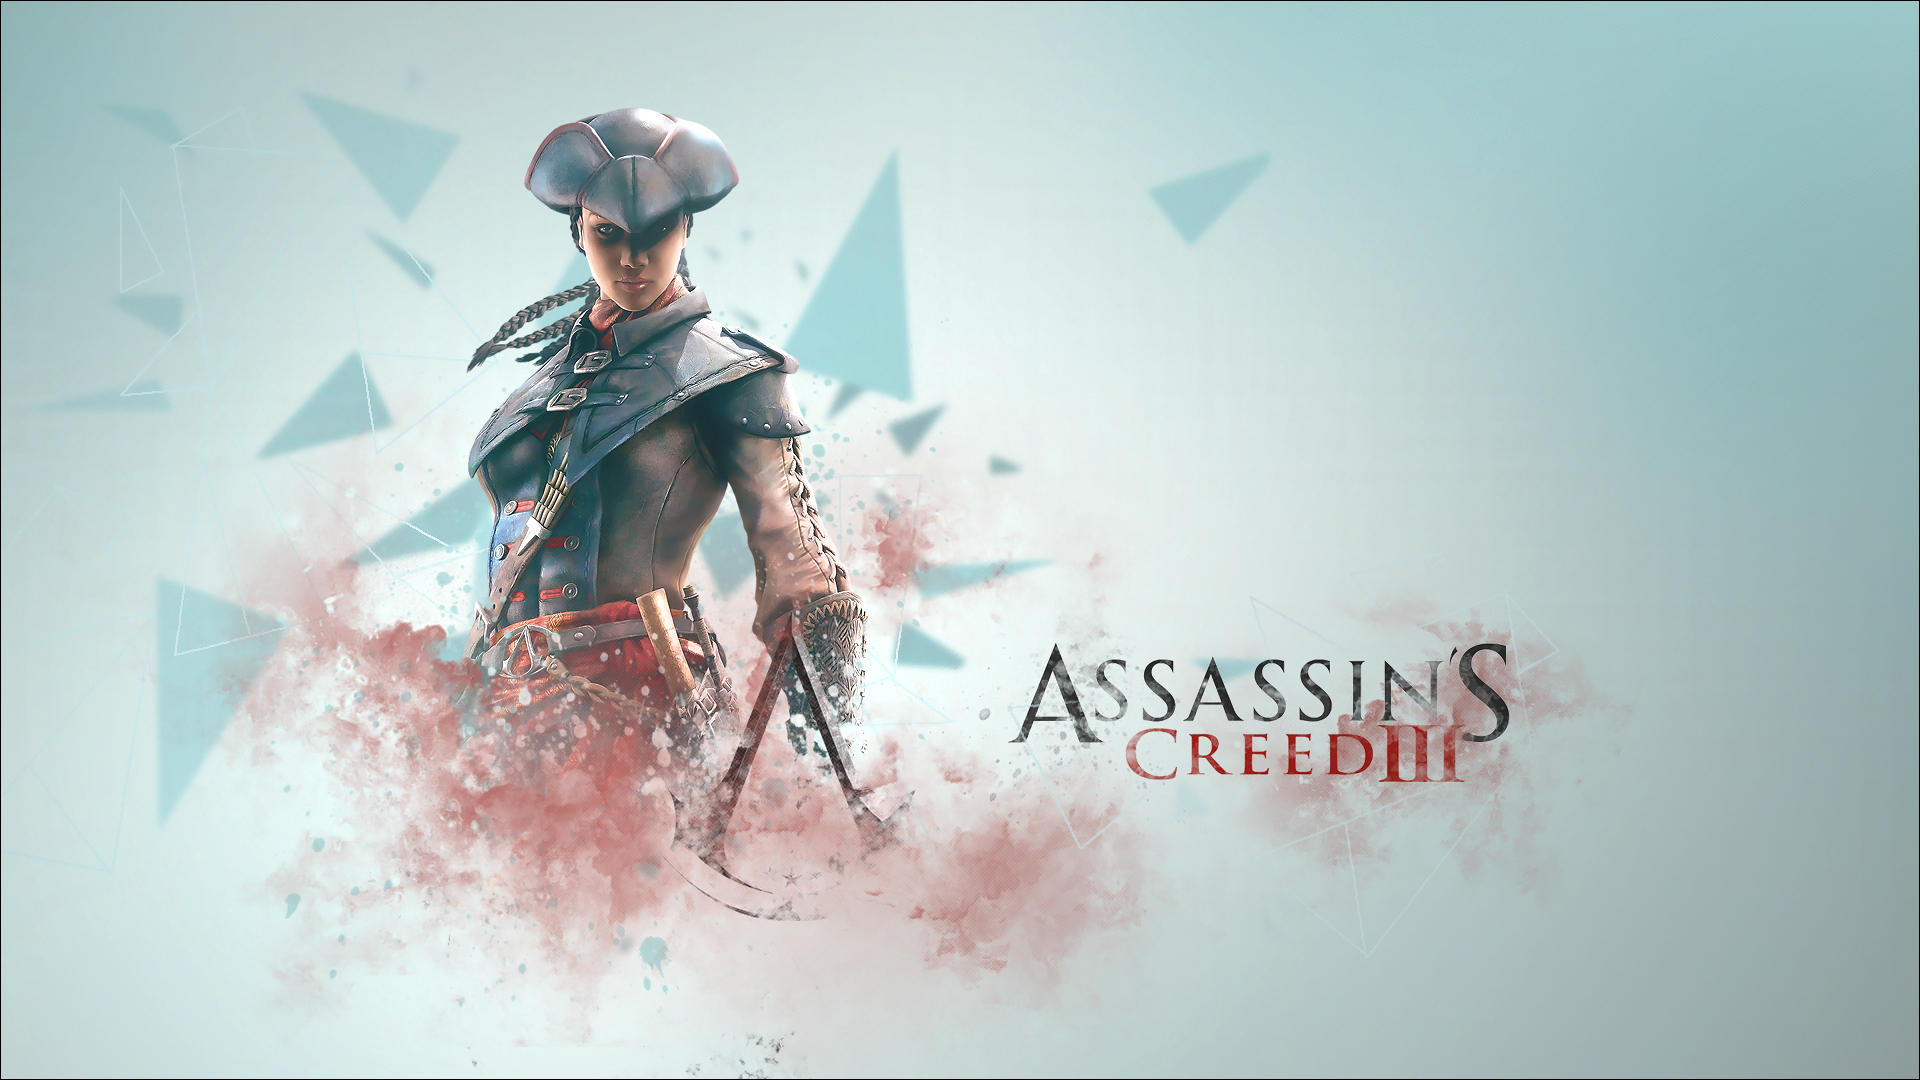 Assassin's Creed Liberation - Wallpaper 1920x1080 by Greev on DeviantArt